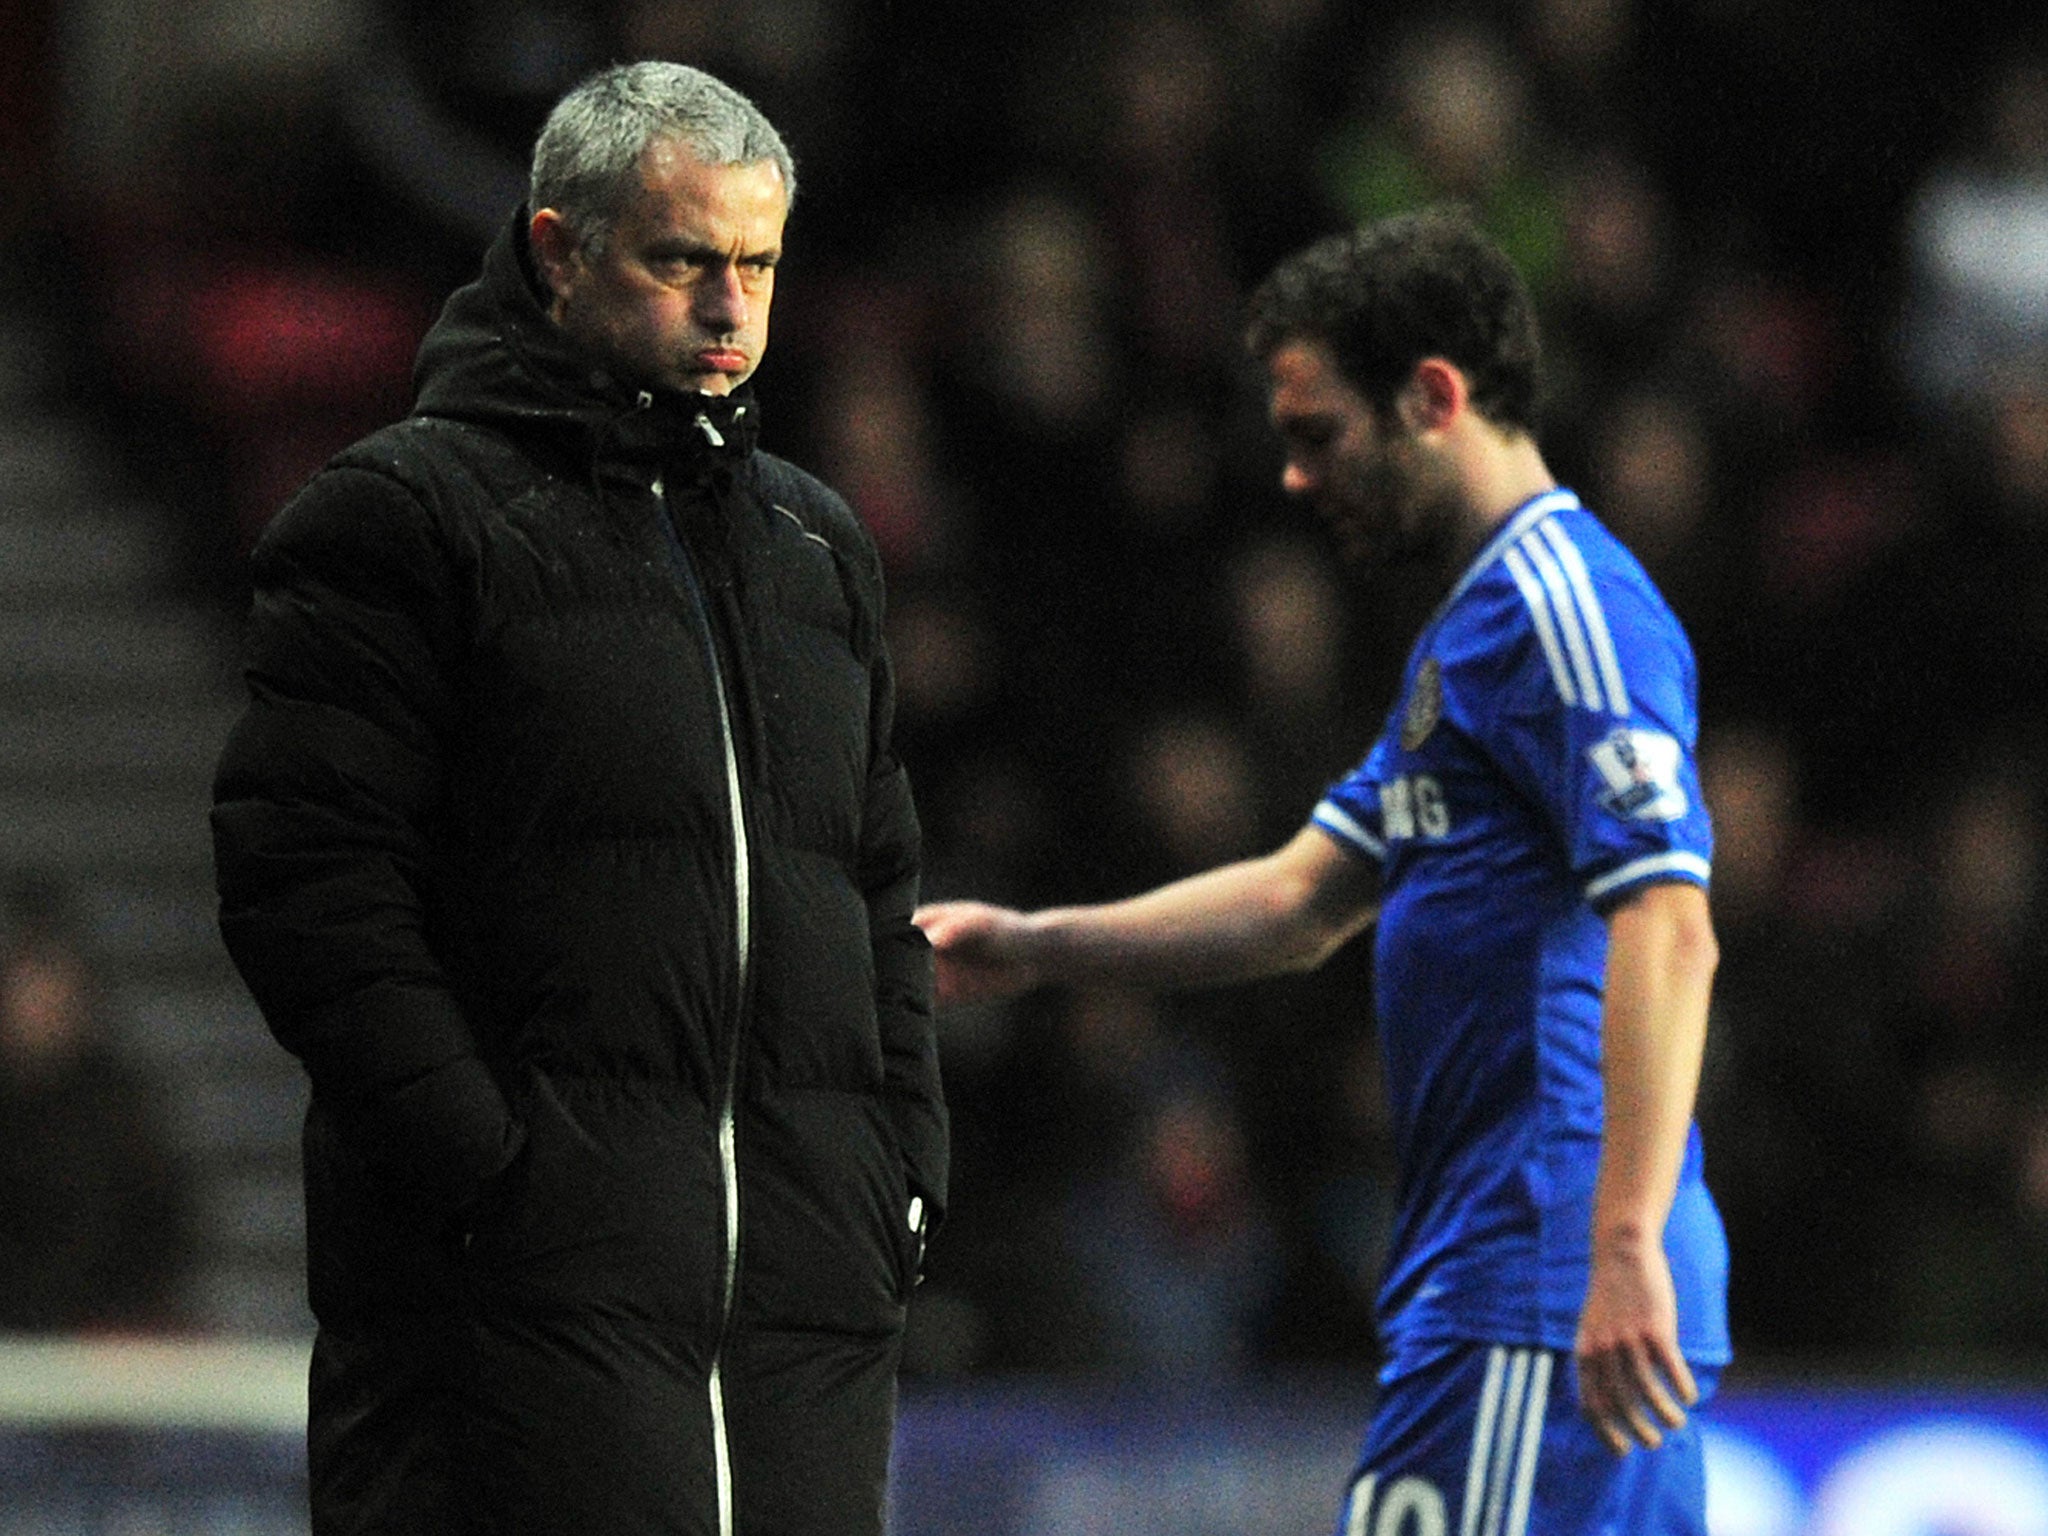 Jose Mourinho and Juan Mata avoid making eye contact after the latter is substituted during the 3-0 victory over Southampton